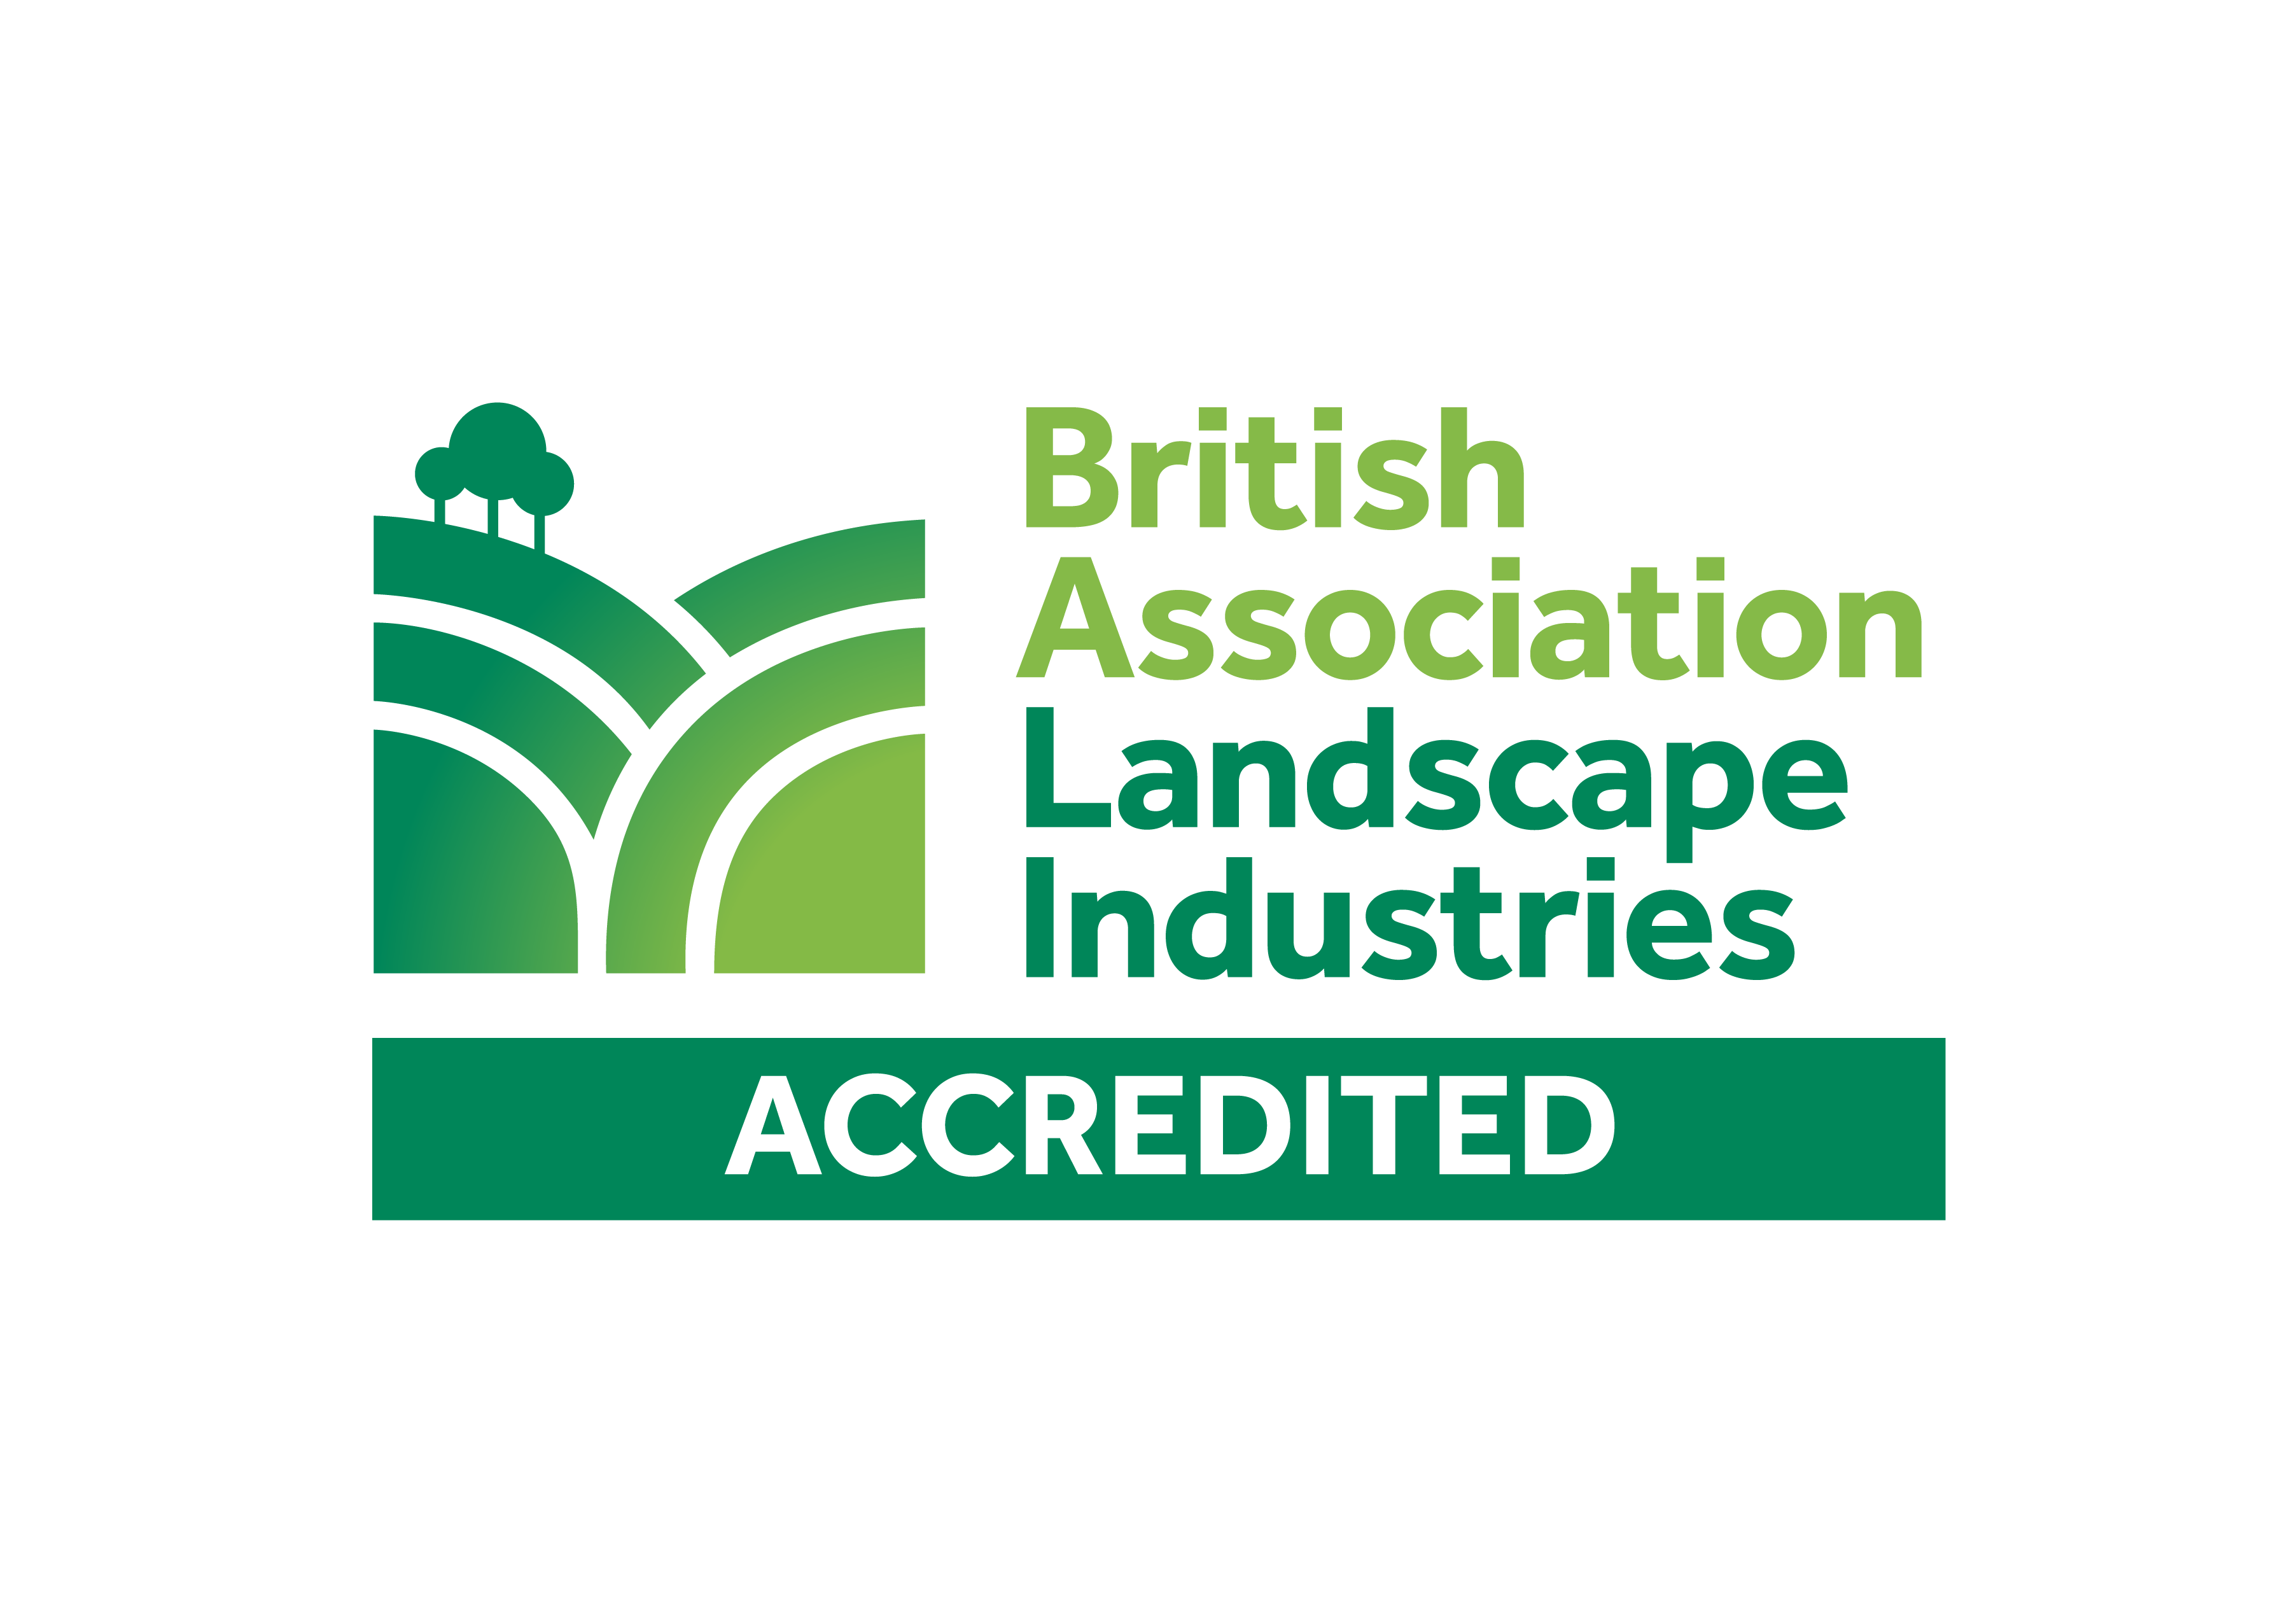 Green graphics, rolling hills with a tree and the words British Association Landscape Industries Accredited